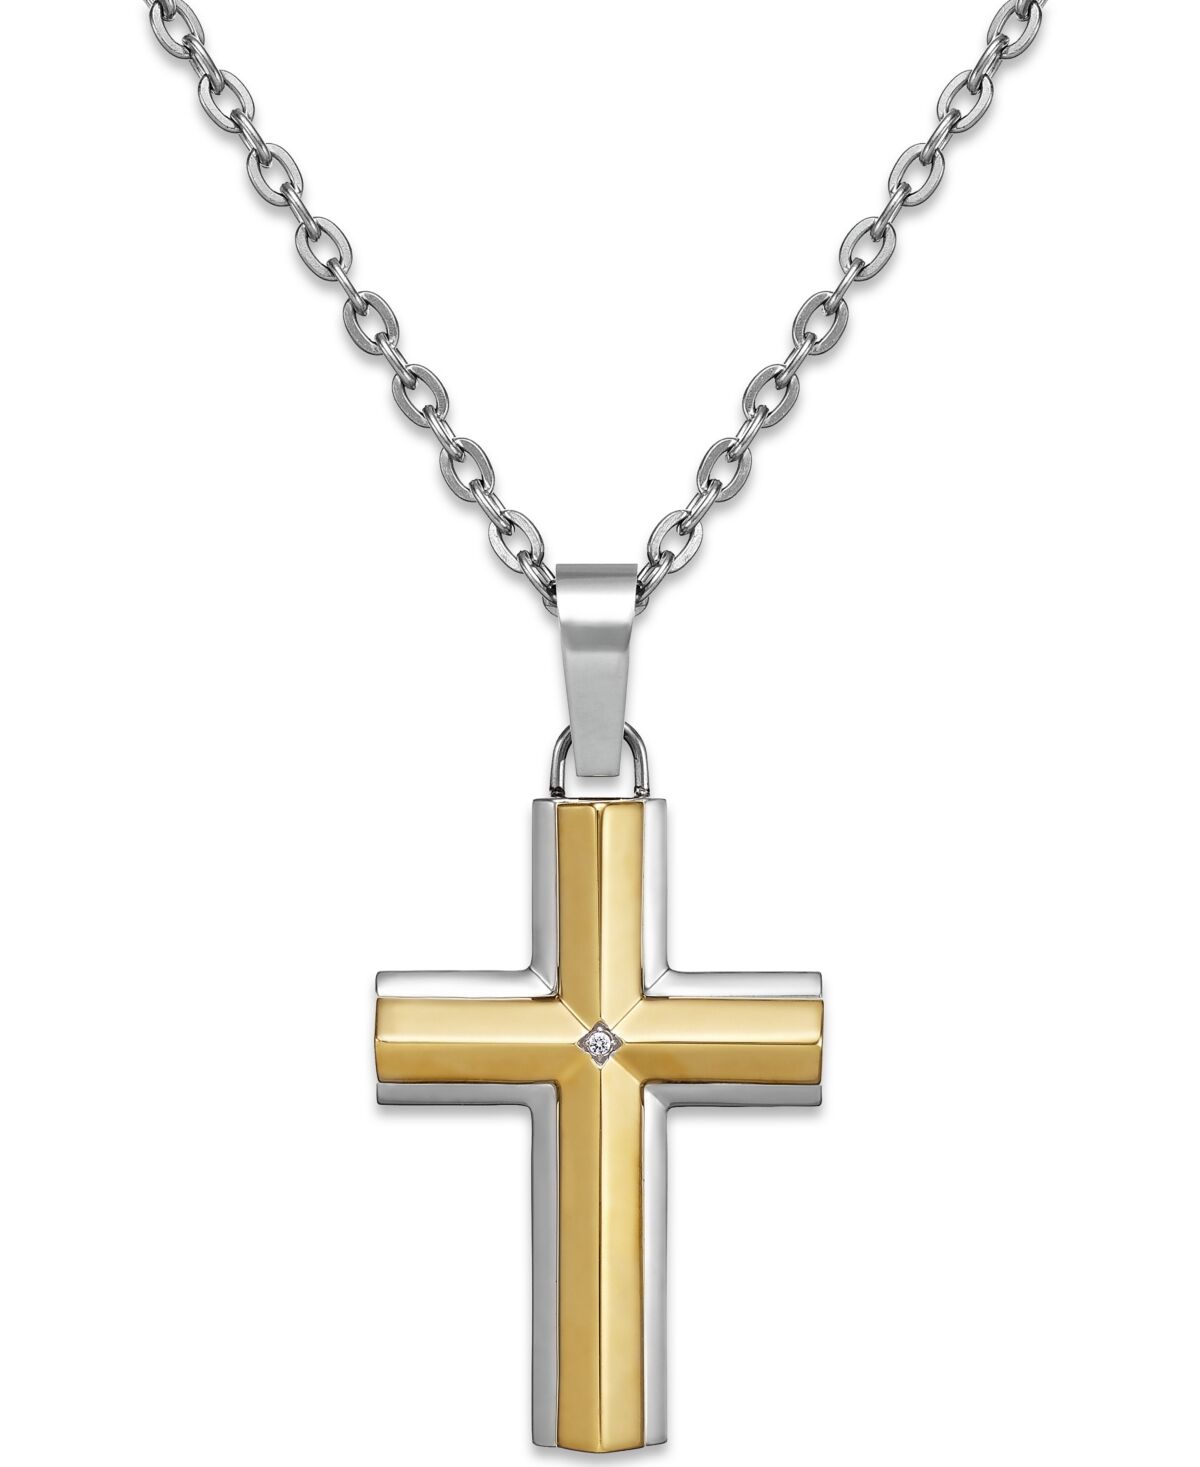 Macy's Diamond Accent Cross Pendant Necklace in Stainless Steel and 10K Gold - Sterling Silver